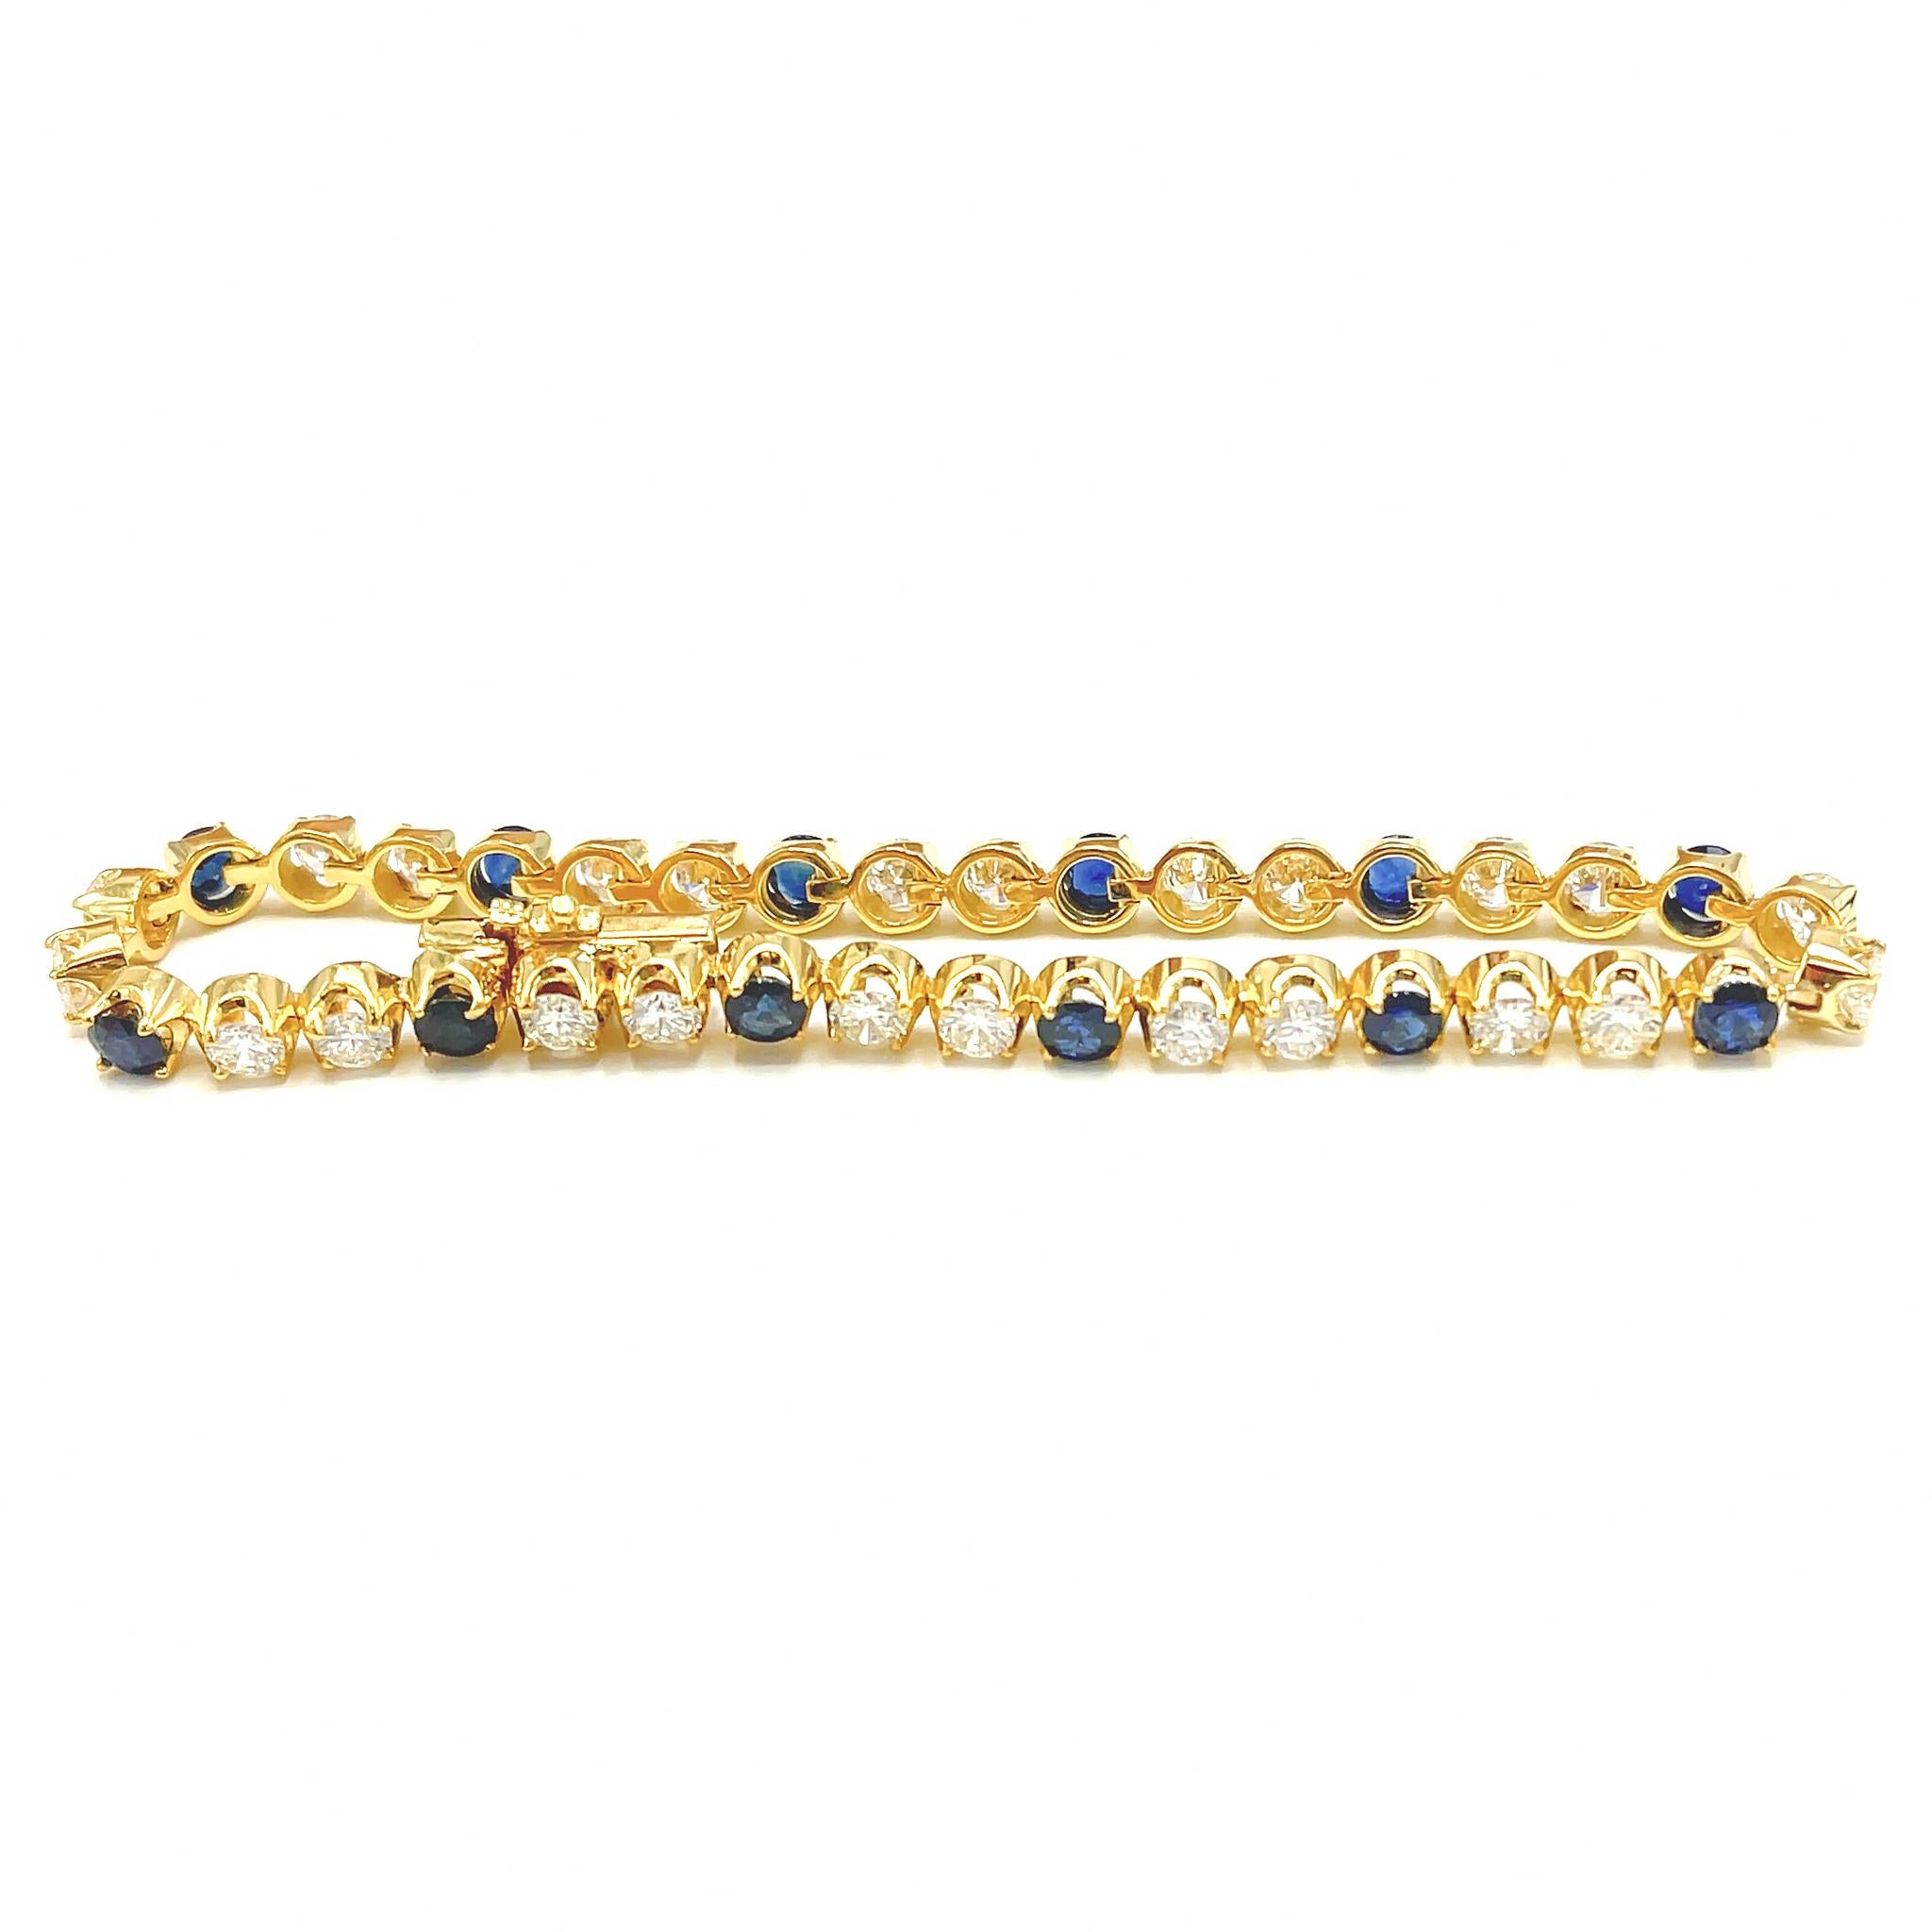 This diamond bracelet lends instant elegance to your wrist. Worn alone it's a luxurious evening classic, layered with a watch it adds effortless style to your daytime look.

18k Yellow Gold
Diamond: 4.30 ct twd
Sapphire: 3 tcw
Length: 7 inches
Total